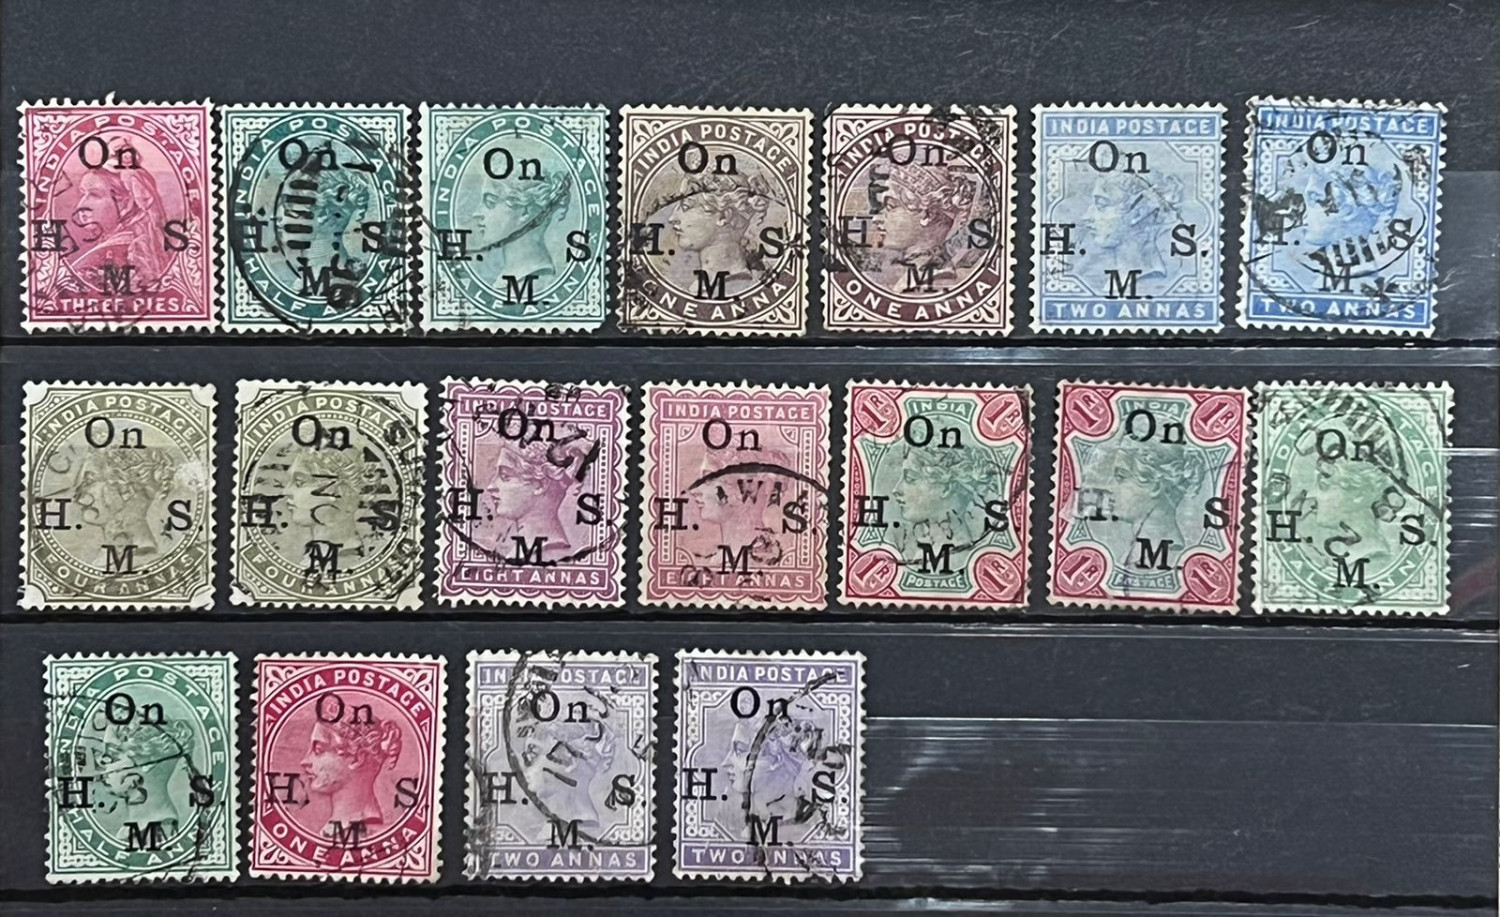 India 1882-1900 QV Empire Star Wmk OnHMS Overprint Complete Collection with all Listed Shades Fine Used